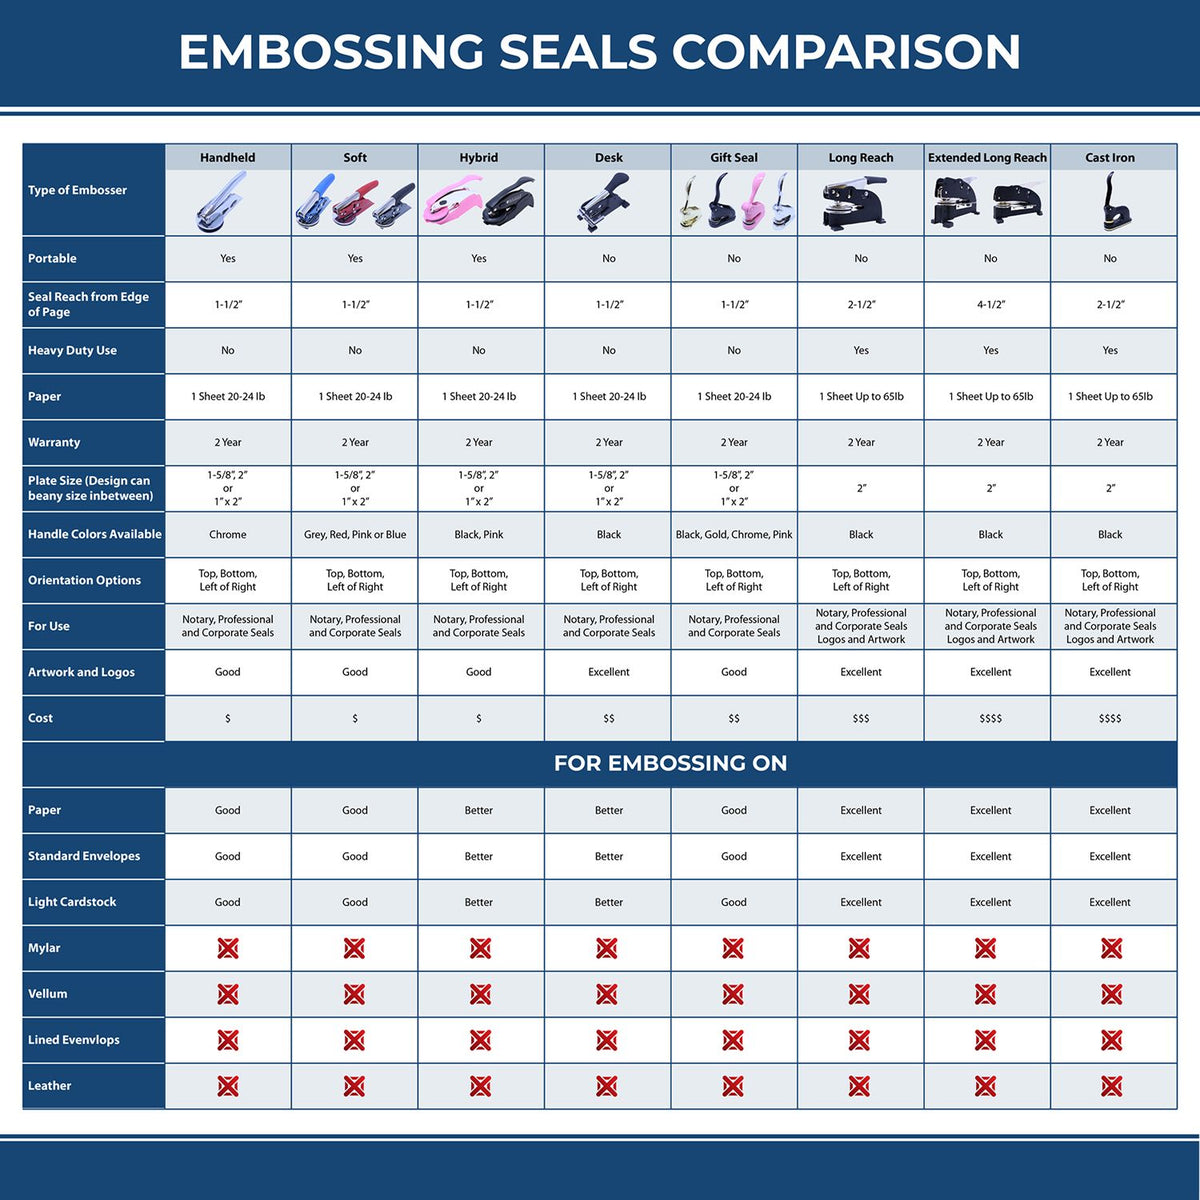 A comparison chart for the different types of mount models available for the Soft Pocket Florida Landscape Architect Embosser.